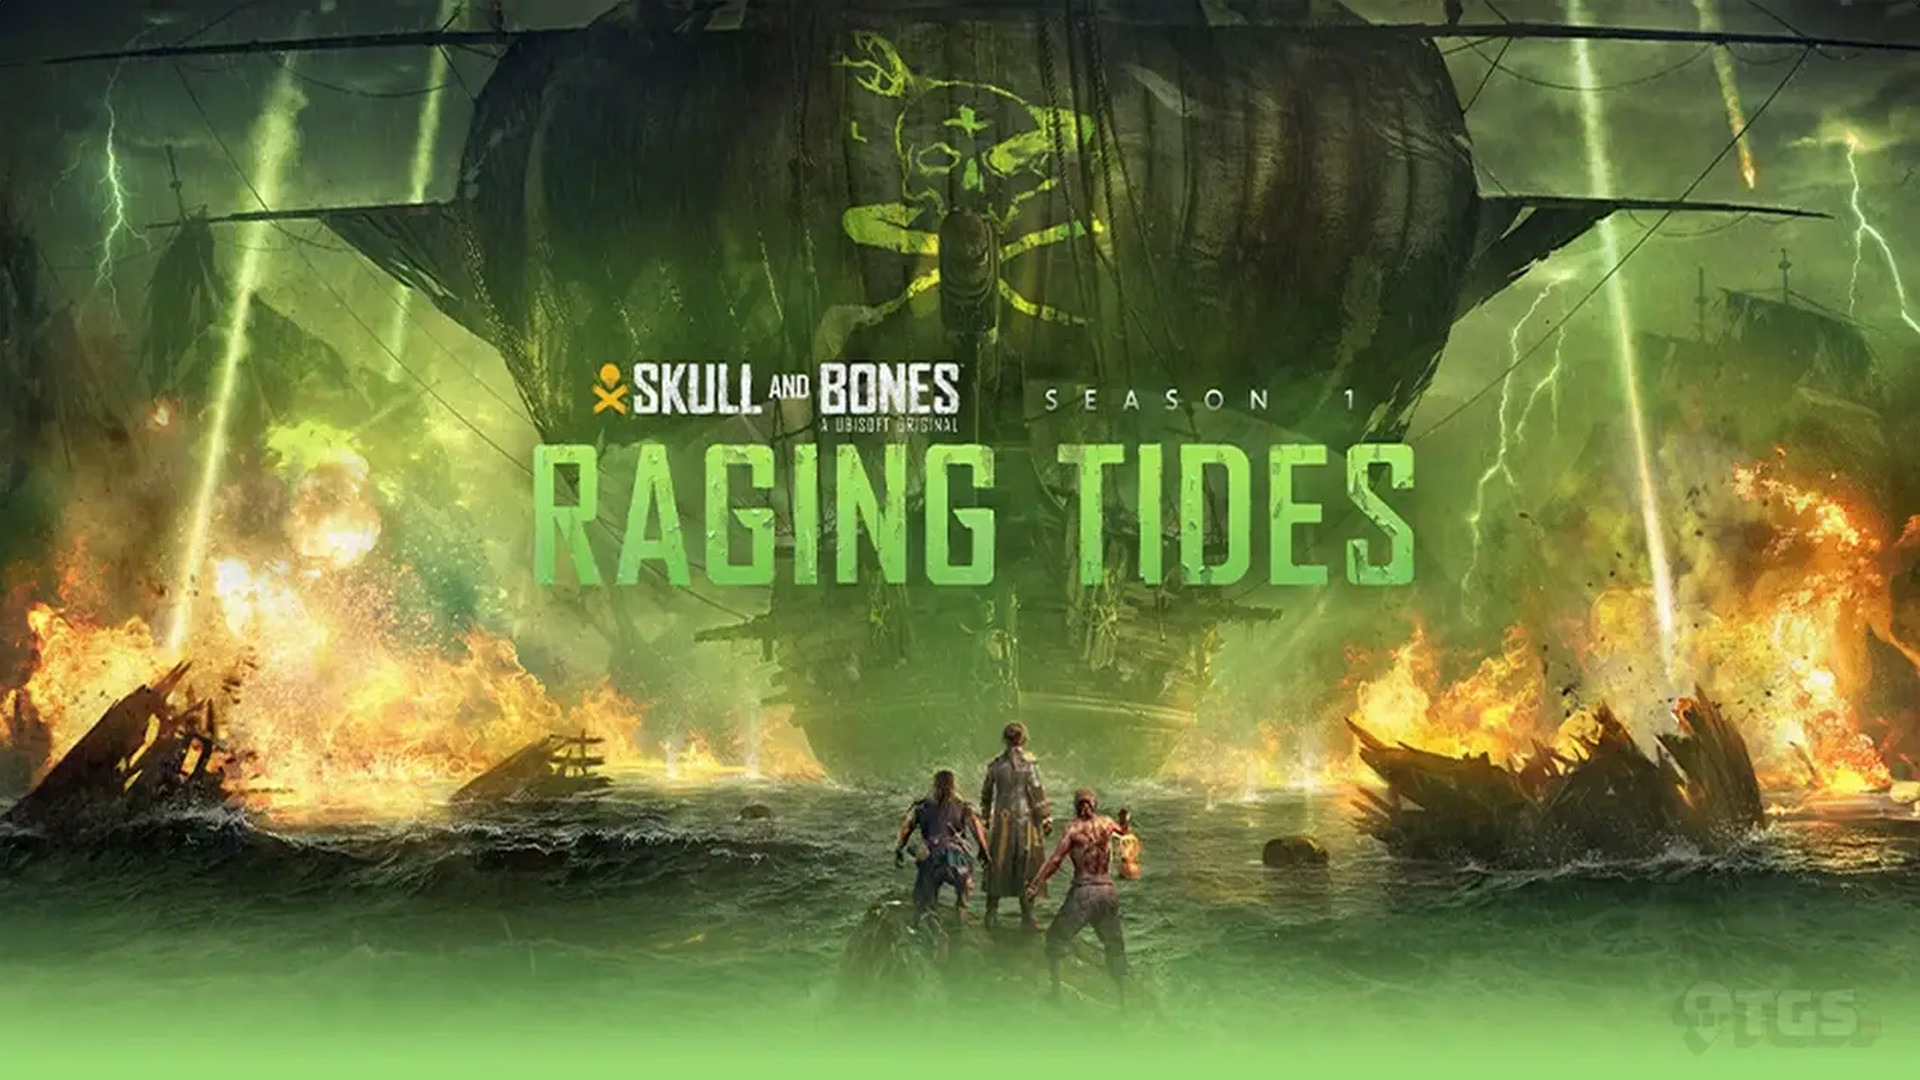 Skull And Bones Season 1 “Raging Tides” Now Available For Free Worldwide